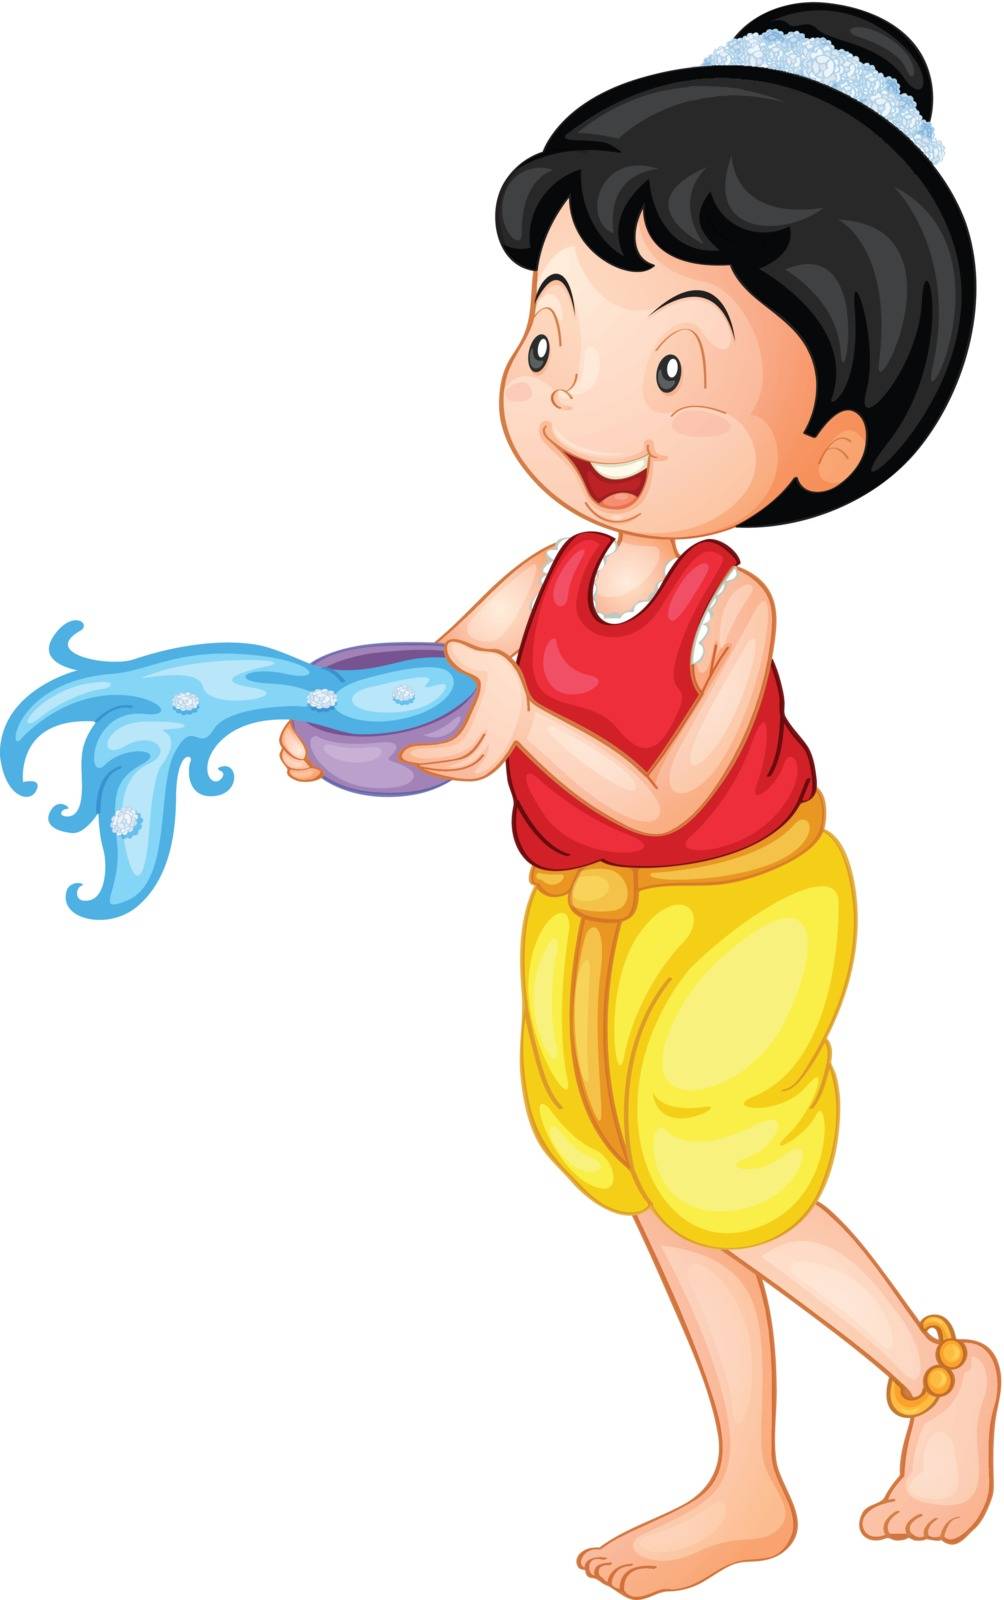 Illustration of a Thai girl throwing water